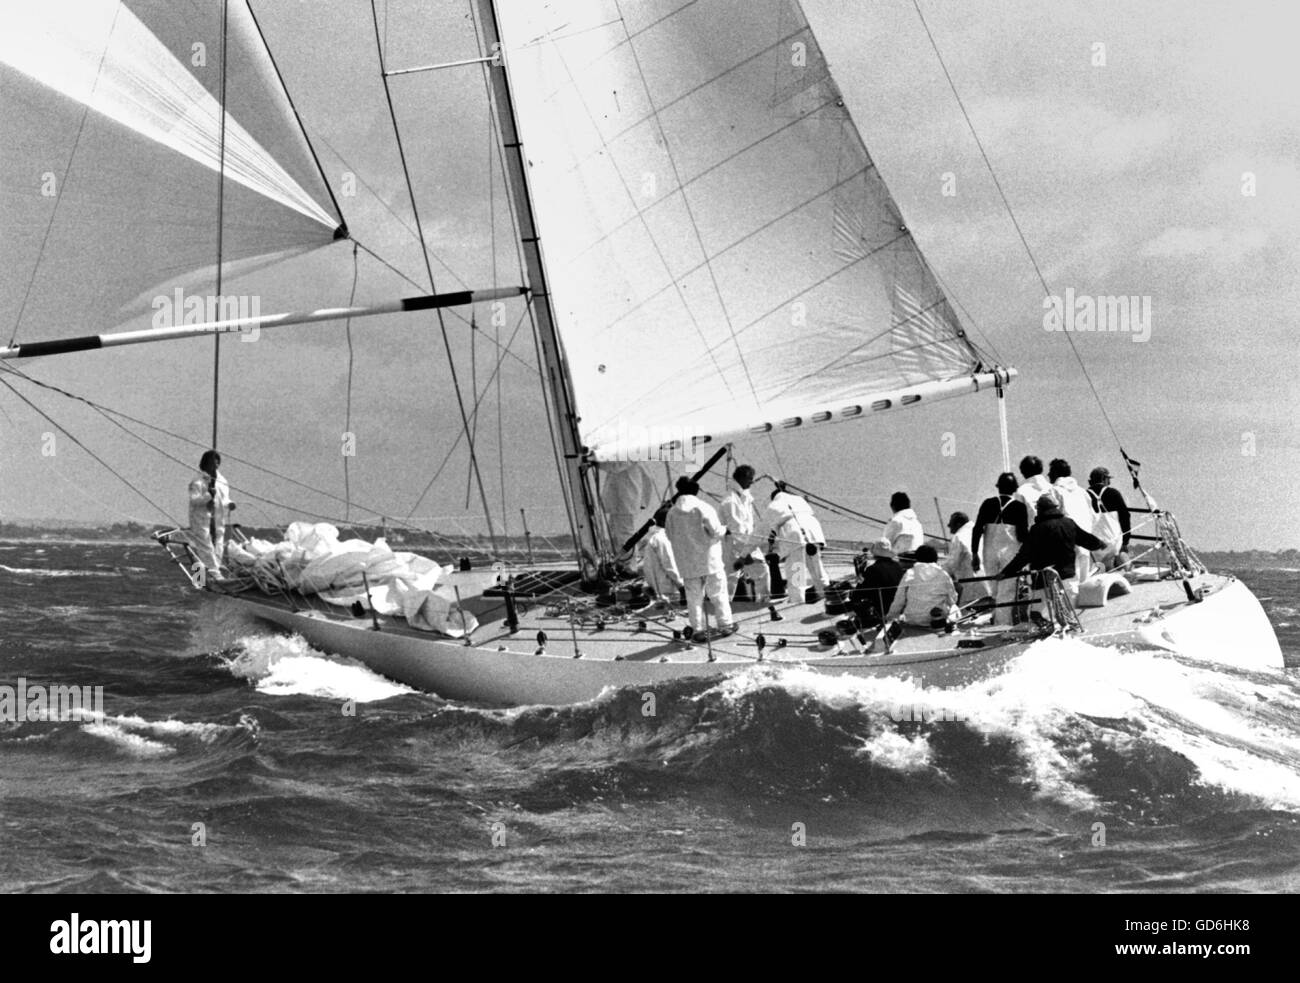 AJAXNETPHOTO. 2ND AUGUST 1979. SOLENT, ENGLAND. - ADMIRAL'S CUP - 2ND INSHORE RACE - ERNEST JUER'S BLIZZARD RUNNING FOR THE CLIPPER BUOYY ONLY SECONDS AHEAD OF ARIES AFTER LOSING 17 MINUTES THROUGH A NAVIGATIONAL ERROR. PHOTO:JONATHAN EASTLAND/AJAX REF:HDD/YA BLIZZARD ADC 1979 Stock Photo